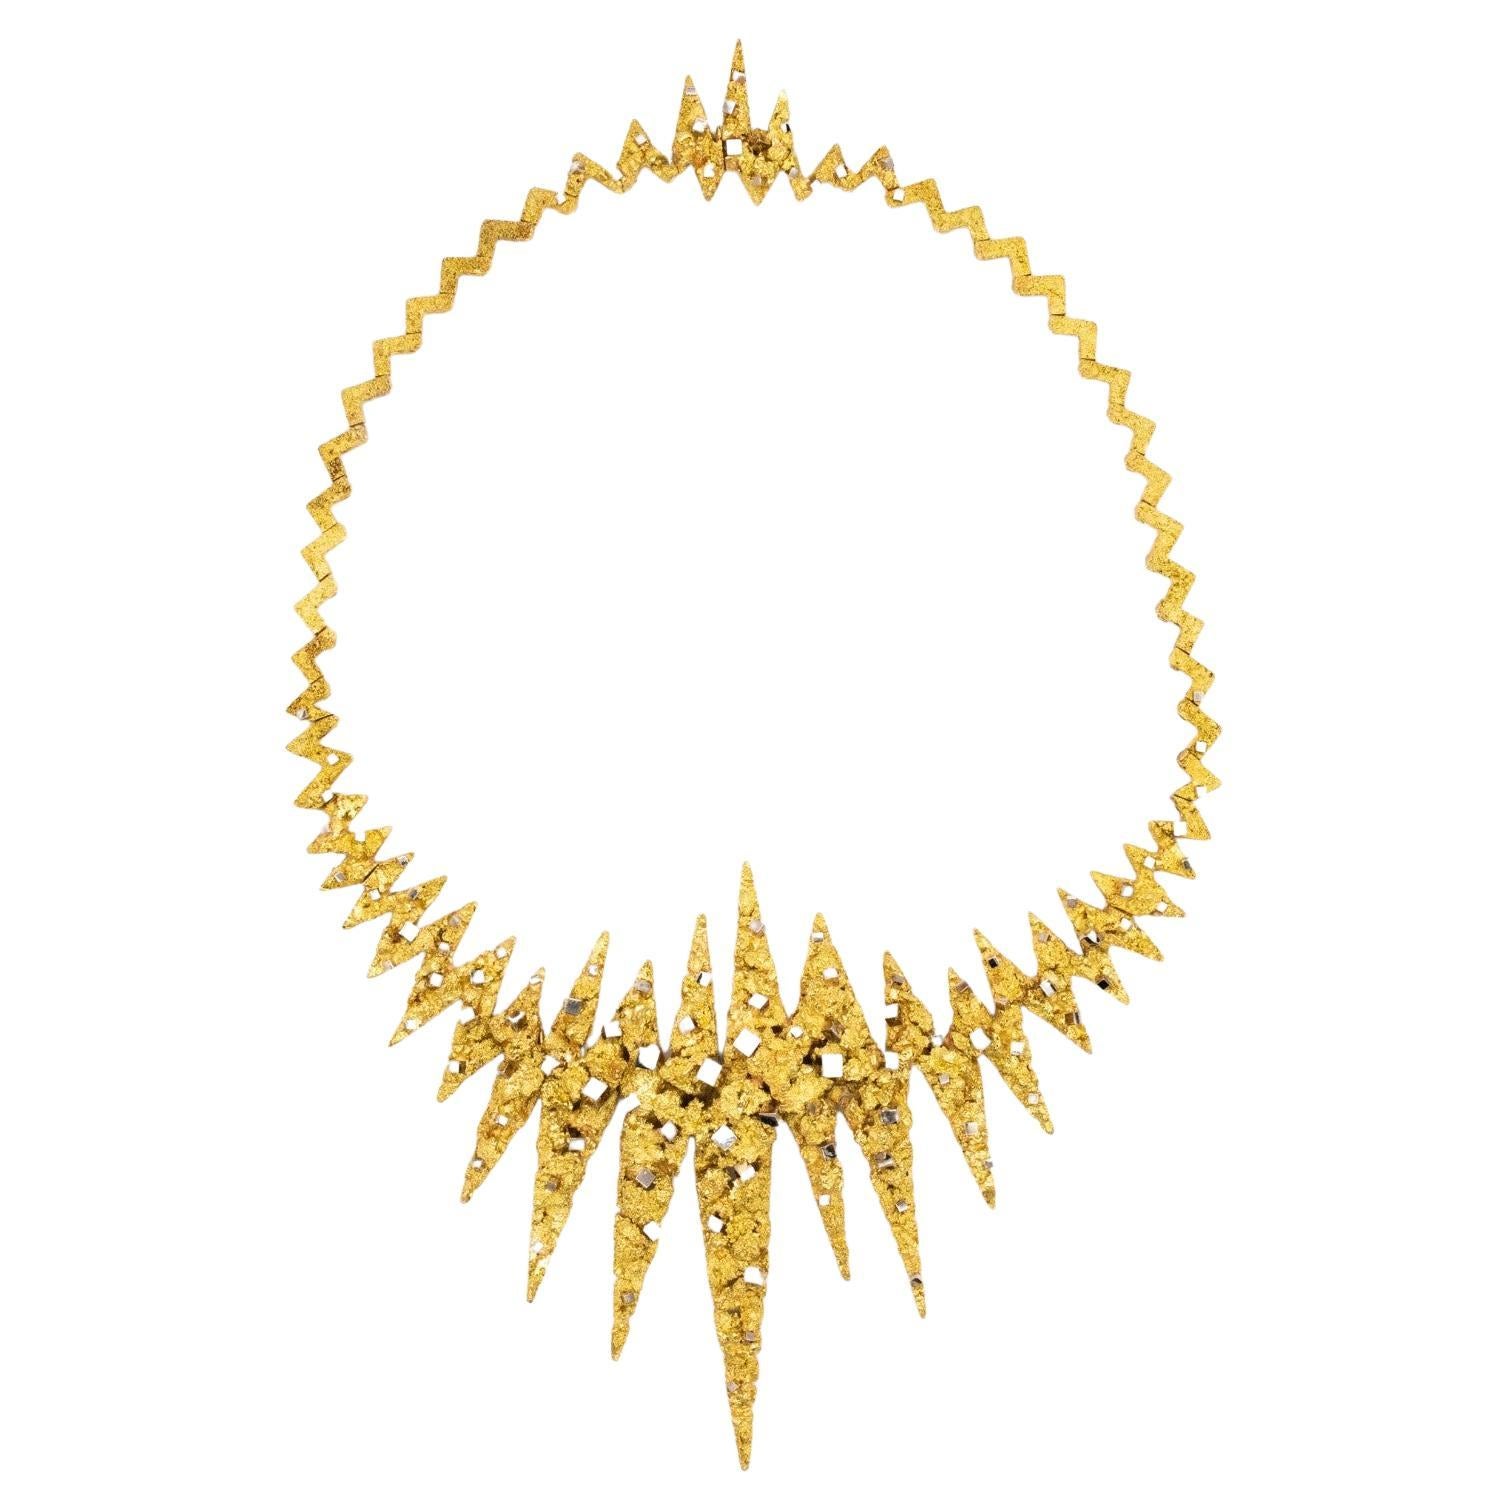 Gay Freres 1950 Paris-Geneva 1950 Retro Stardust Explosion Necklace in 18Kt Gold For Sale